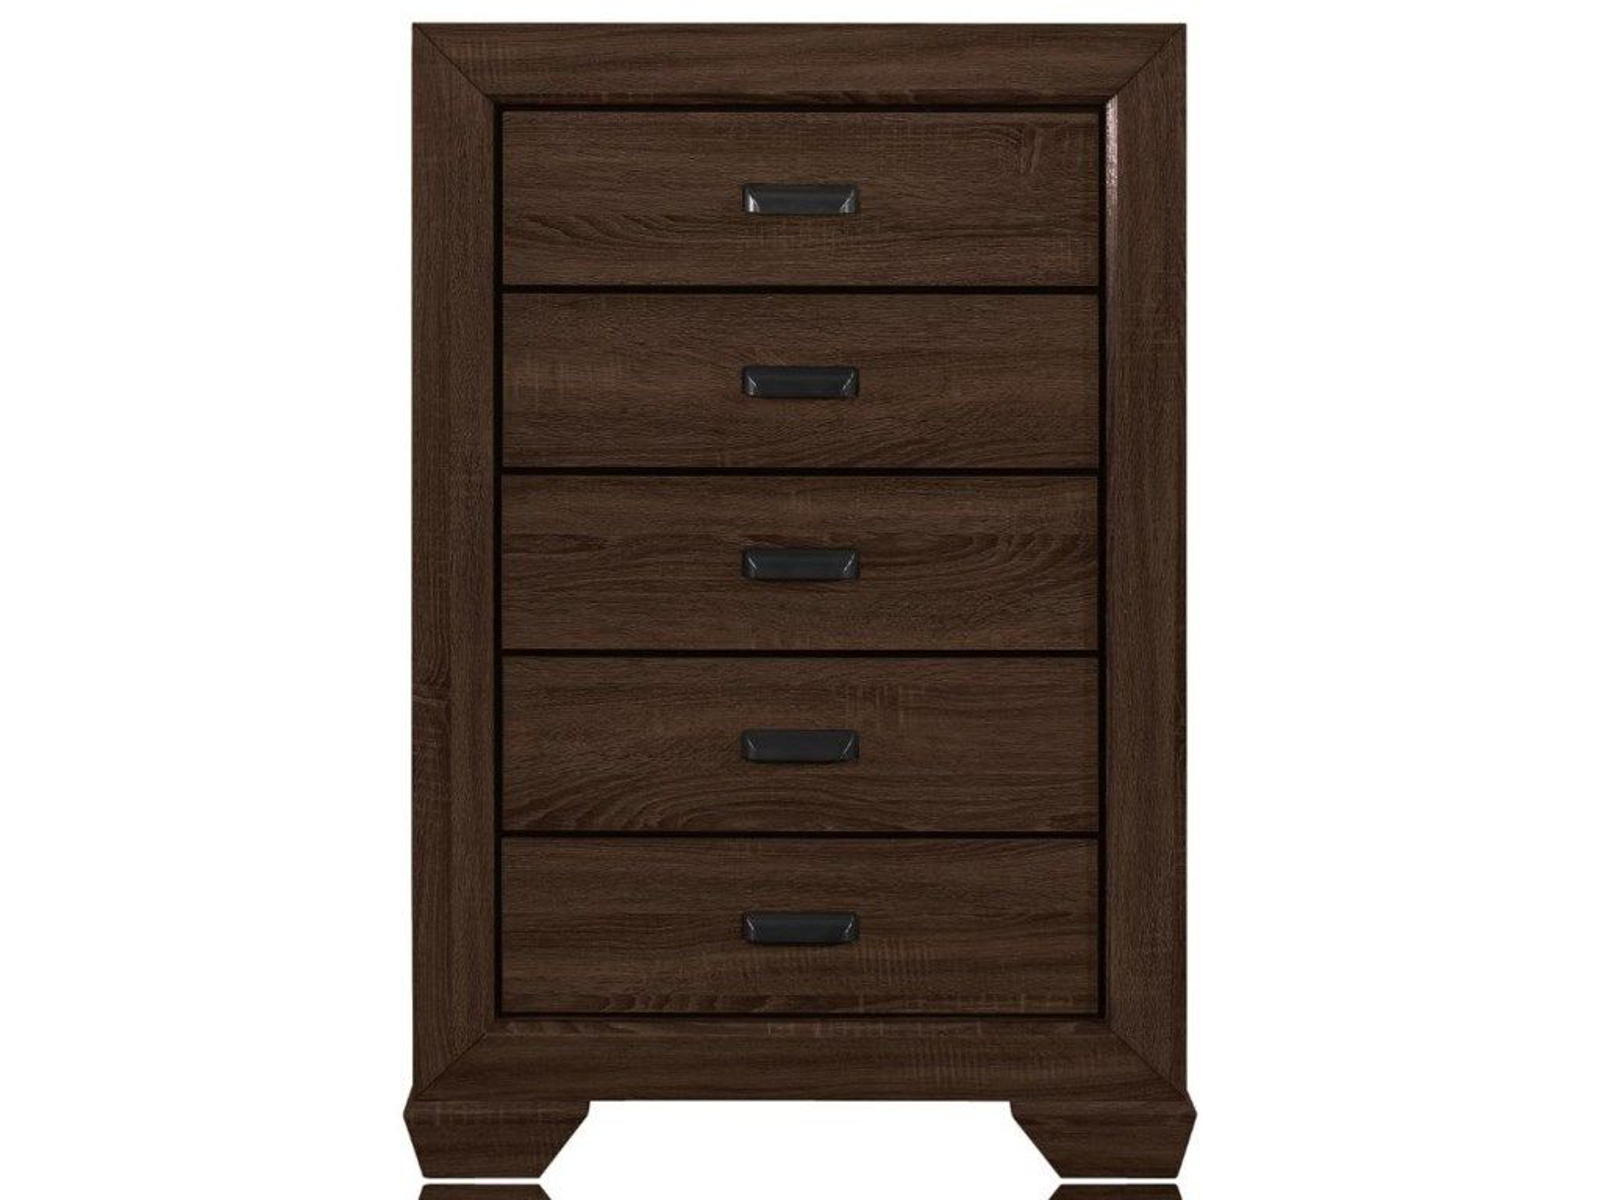 Picture of Farrow Chest of Drawers